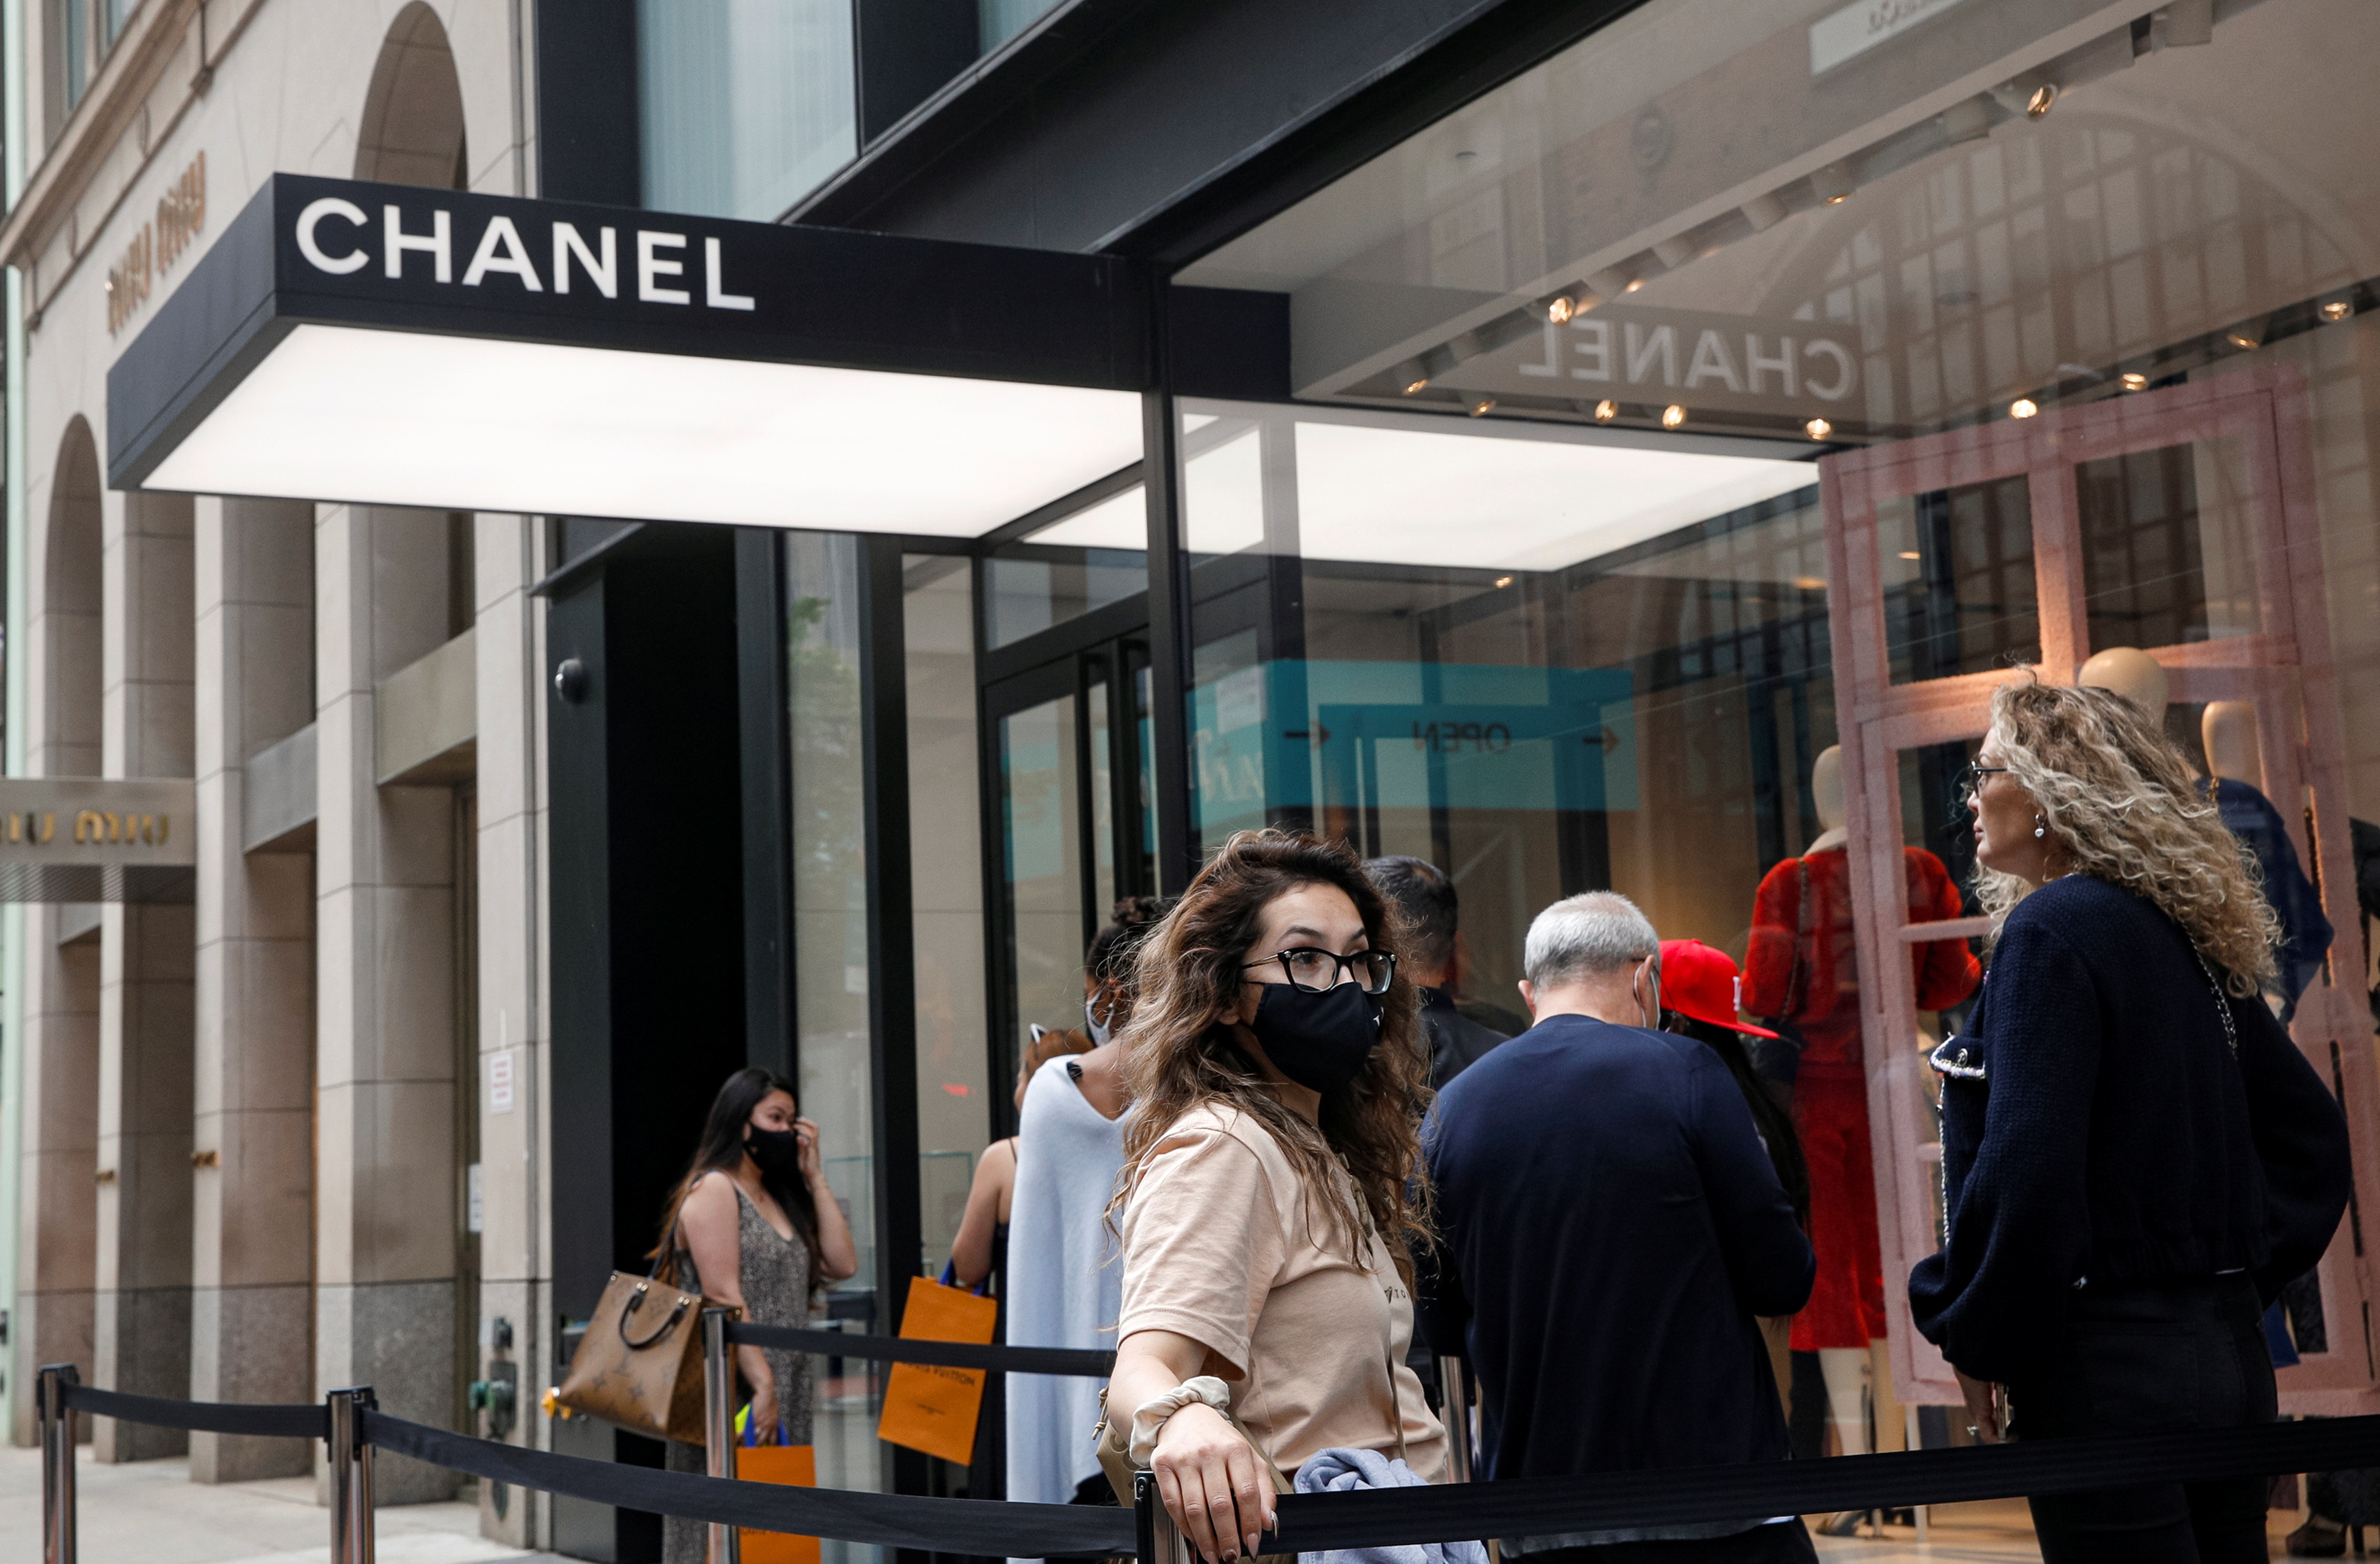 Shoppers wait in line to enter the Chanel store on 57th St in New York